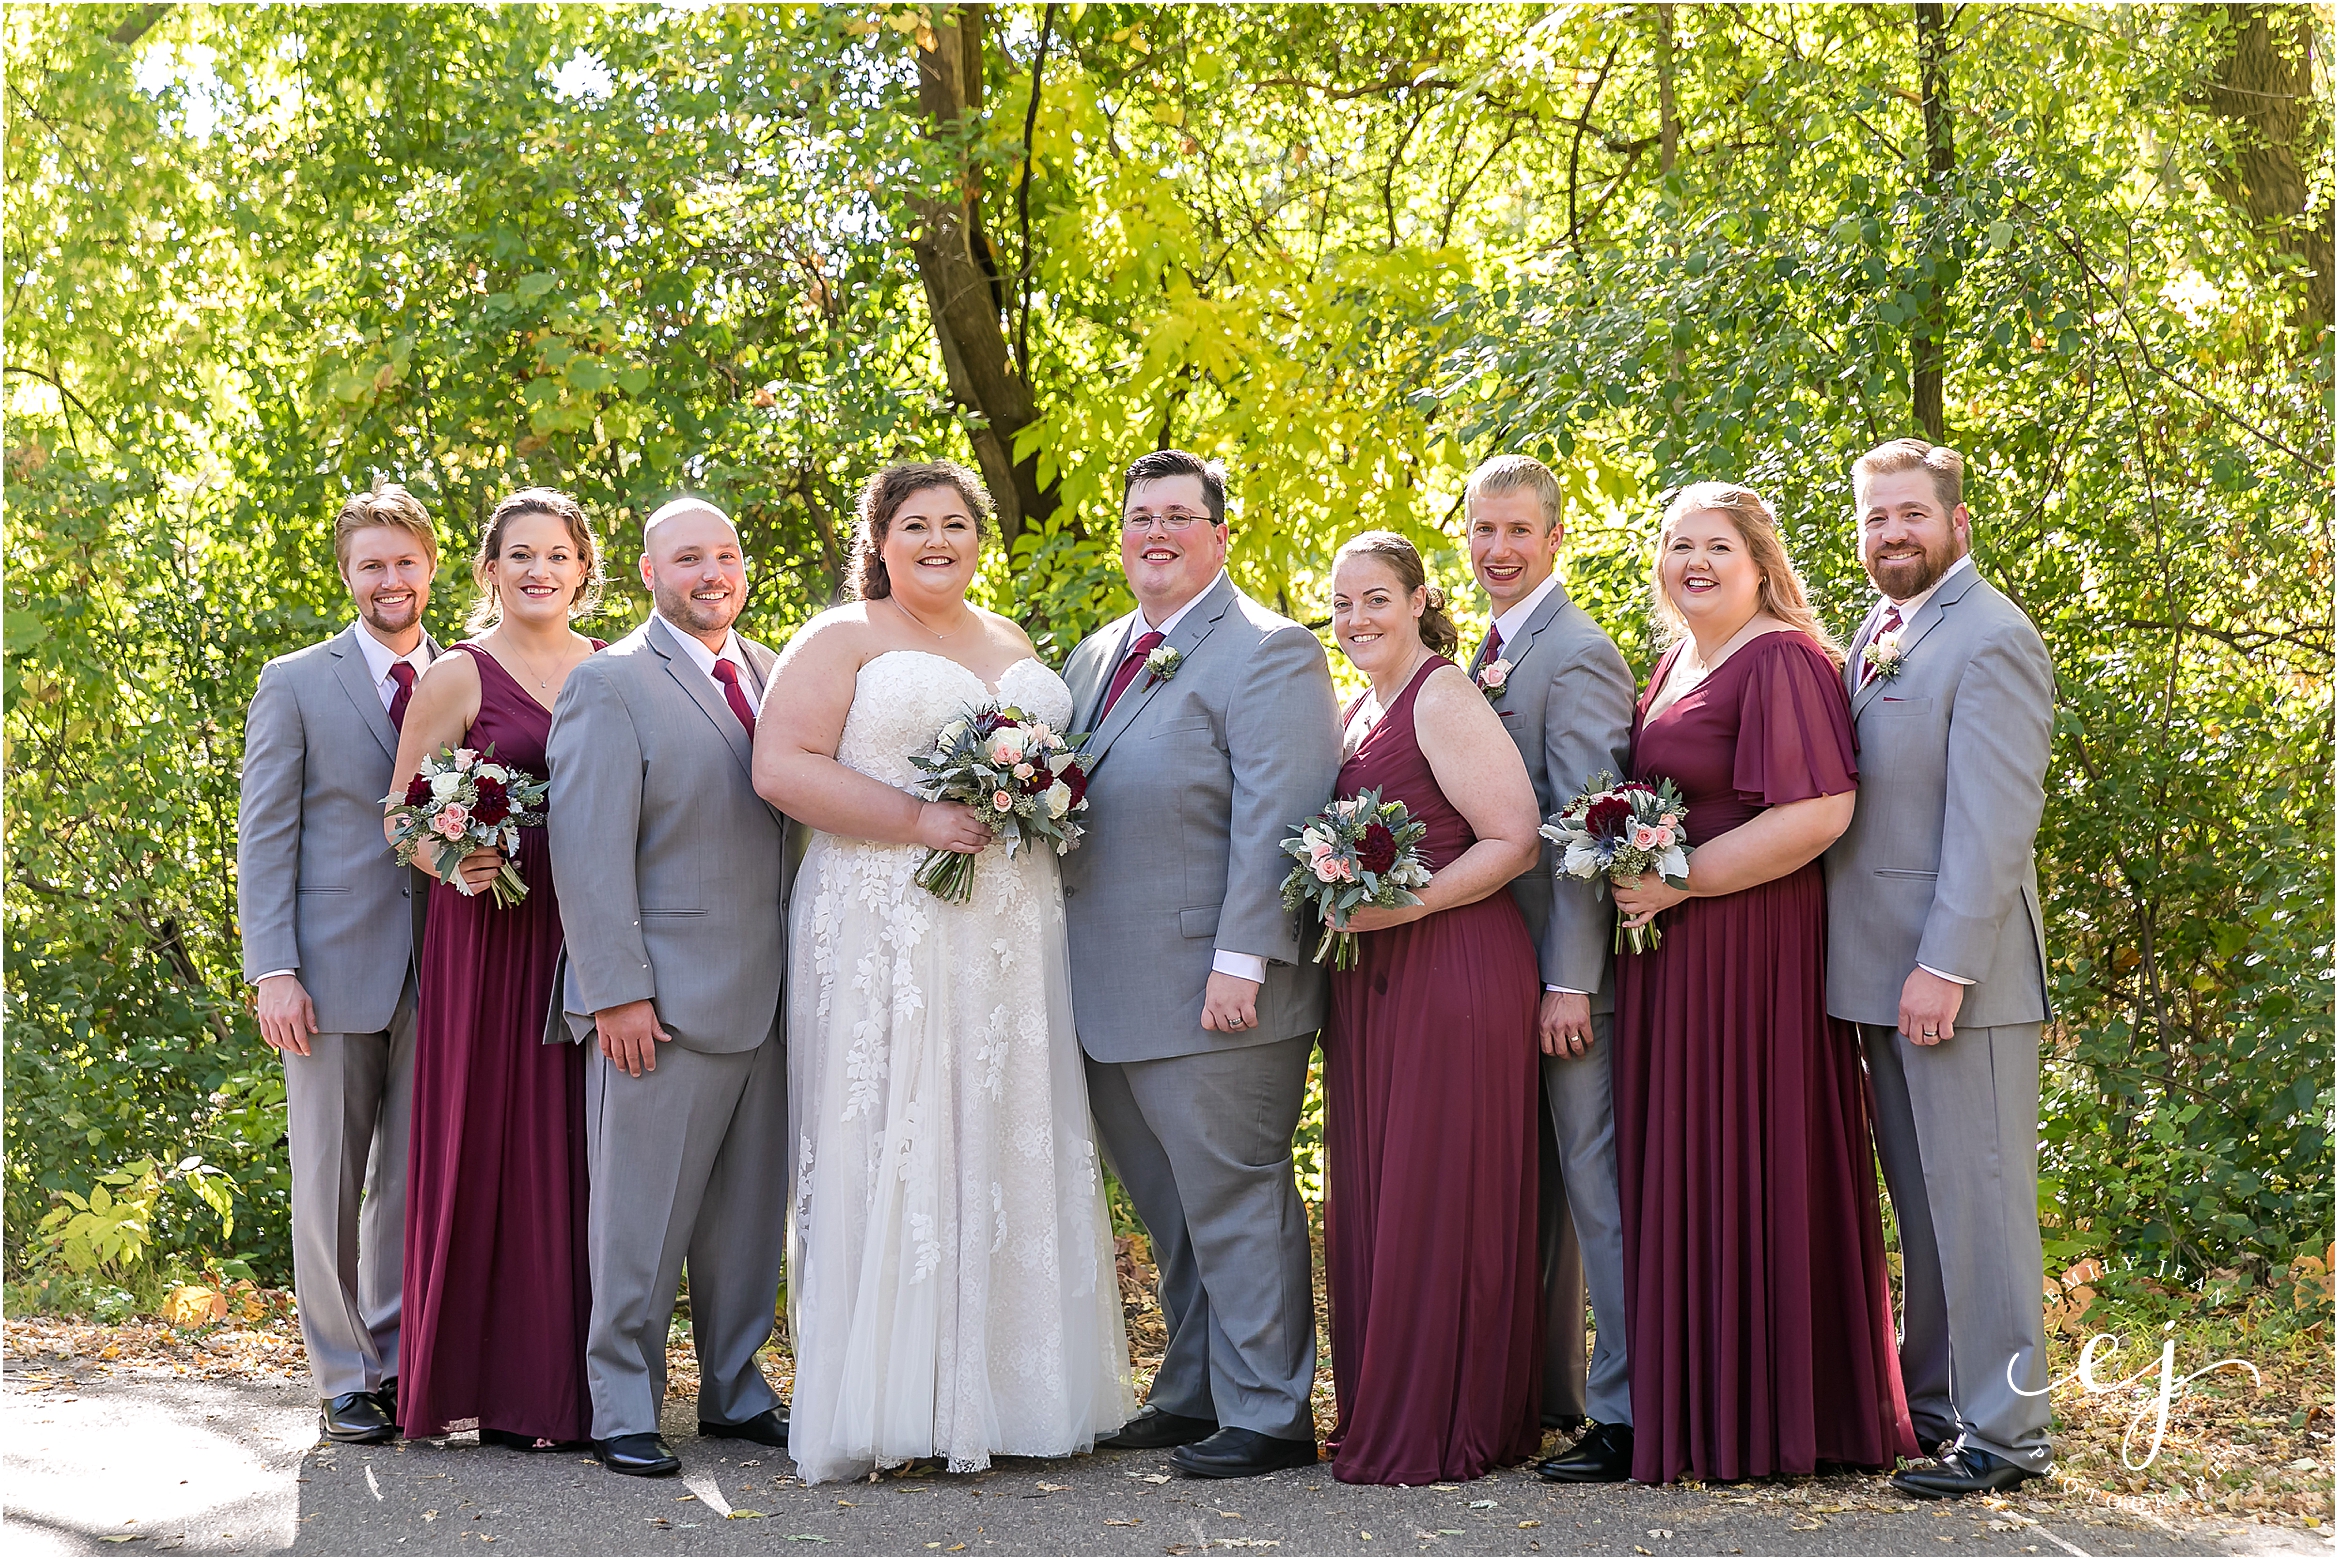 bridal party wedding photo standing with burgundy and light grey